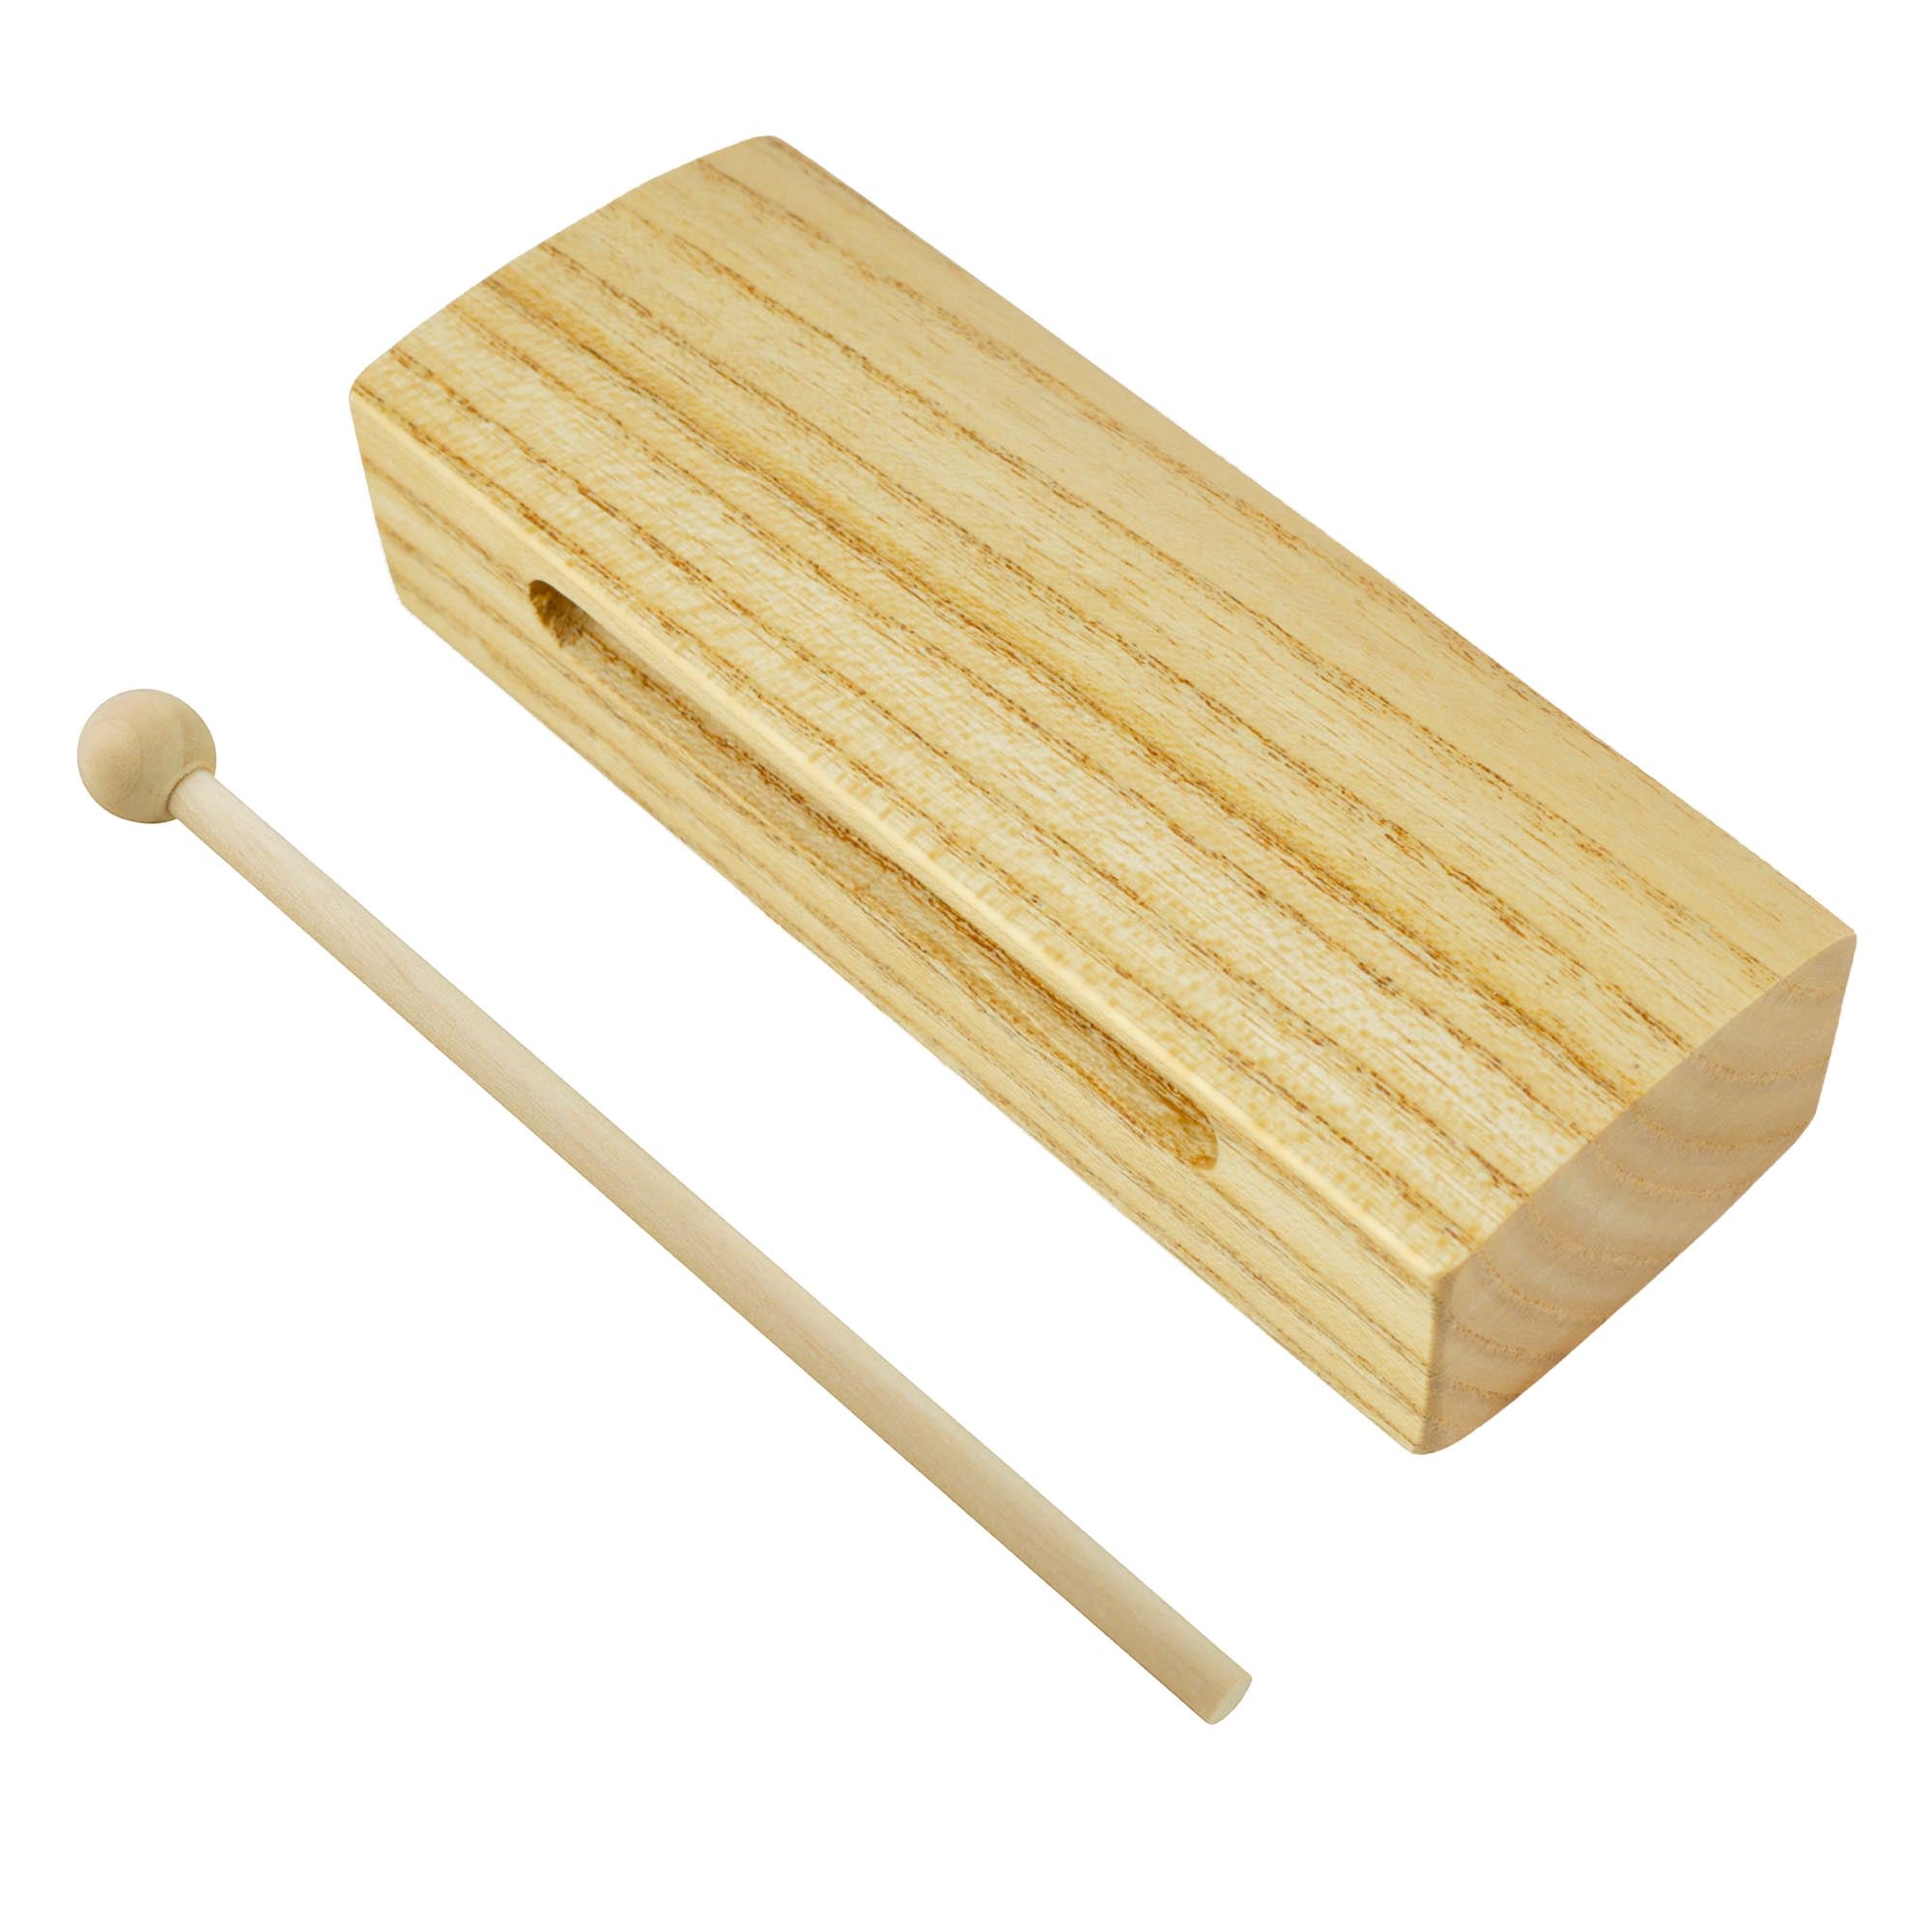 A-Star Wood Block with Beater